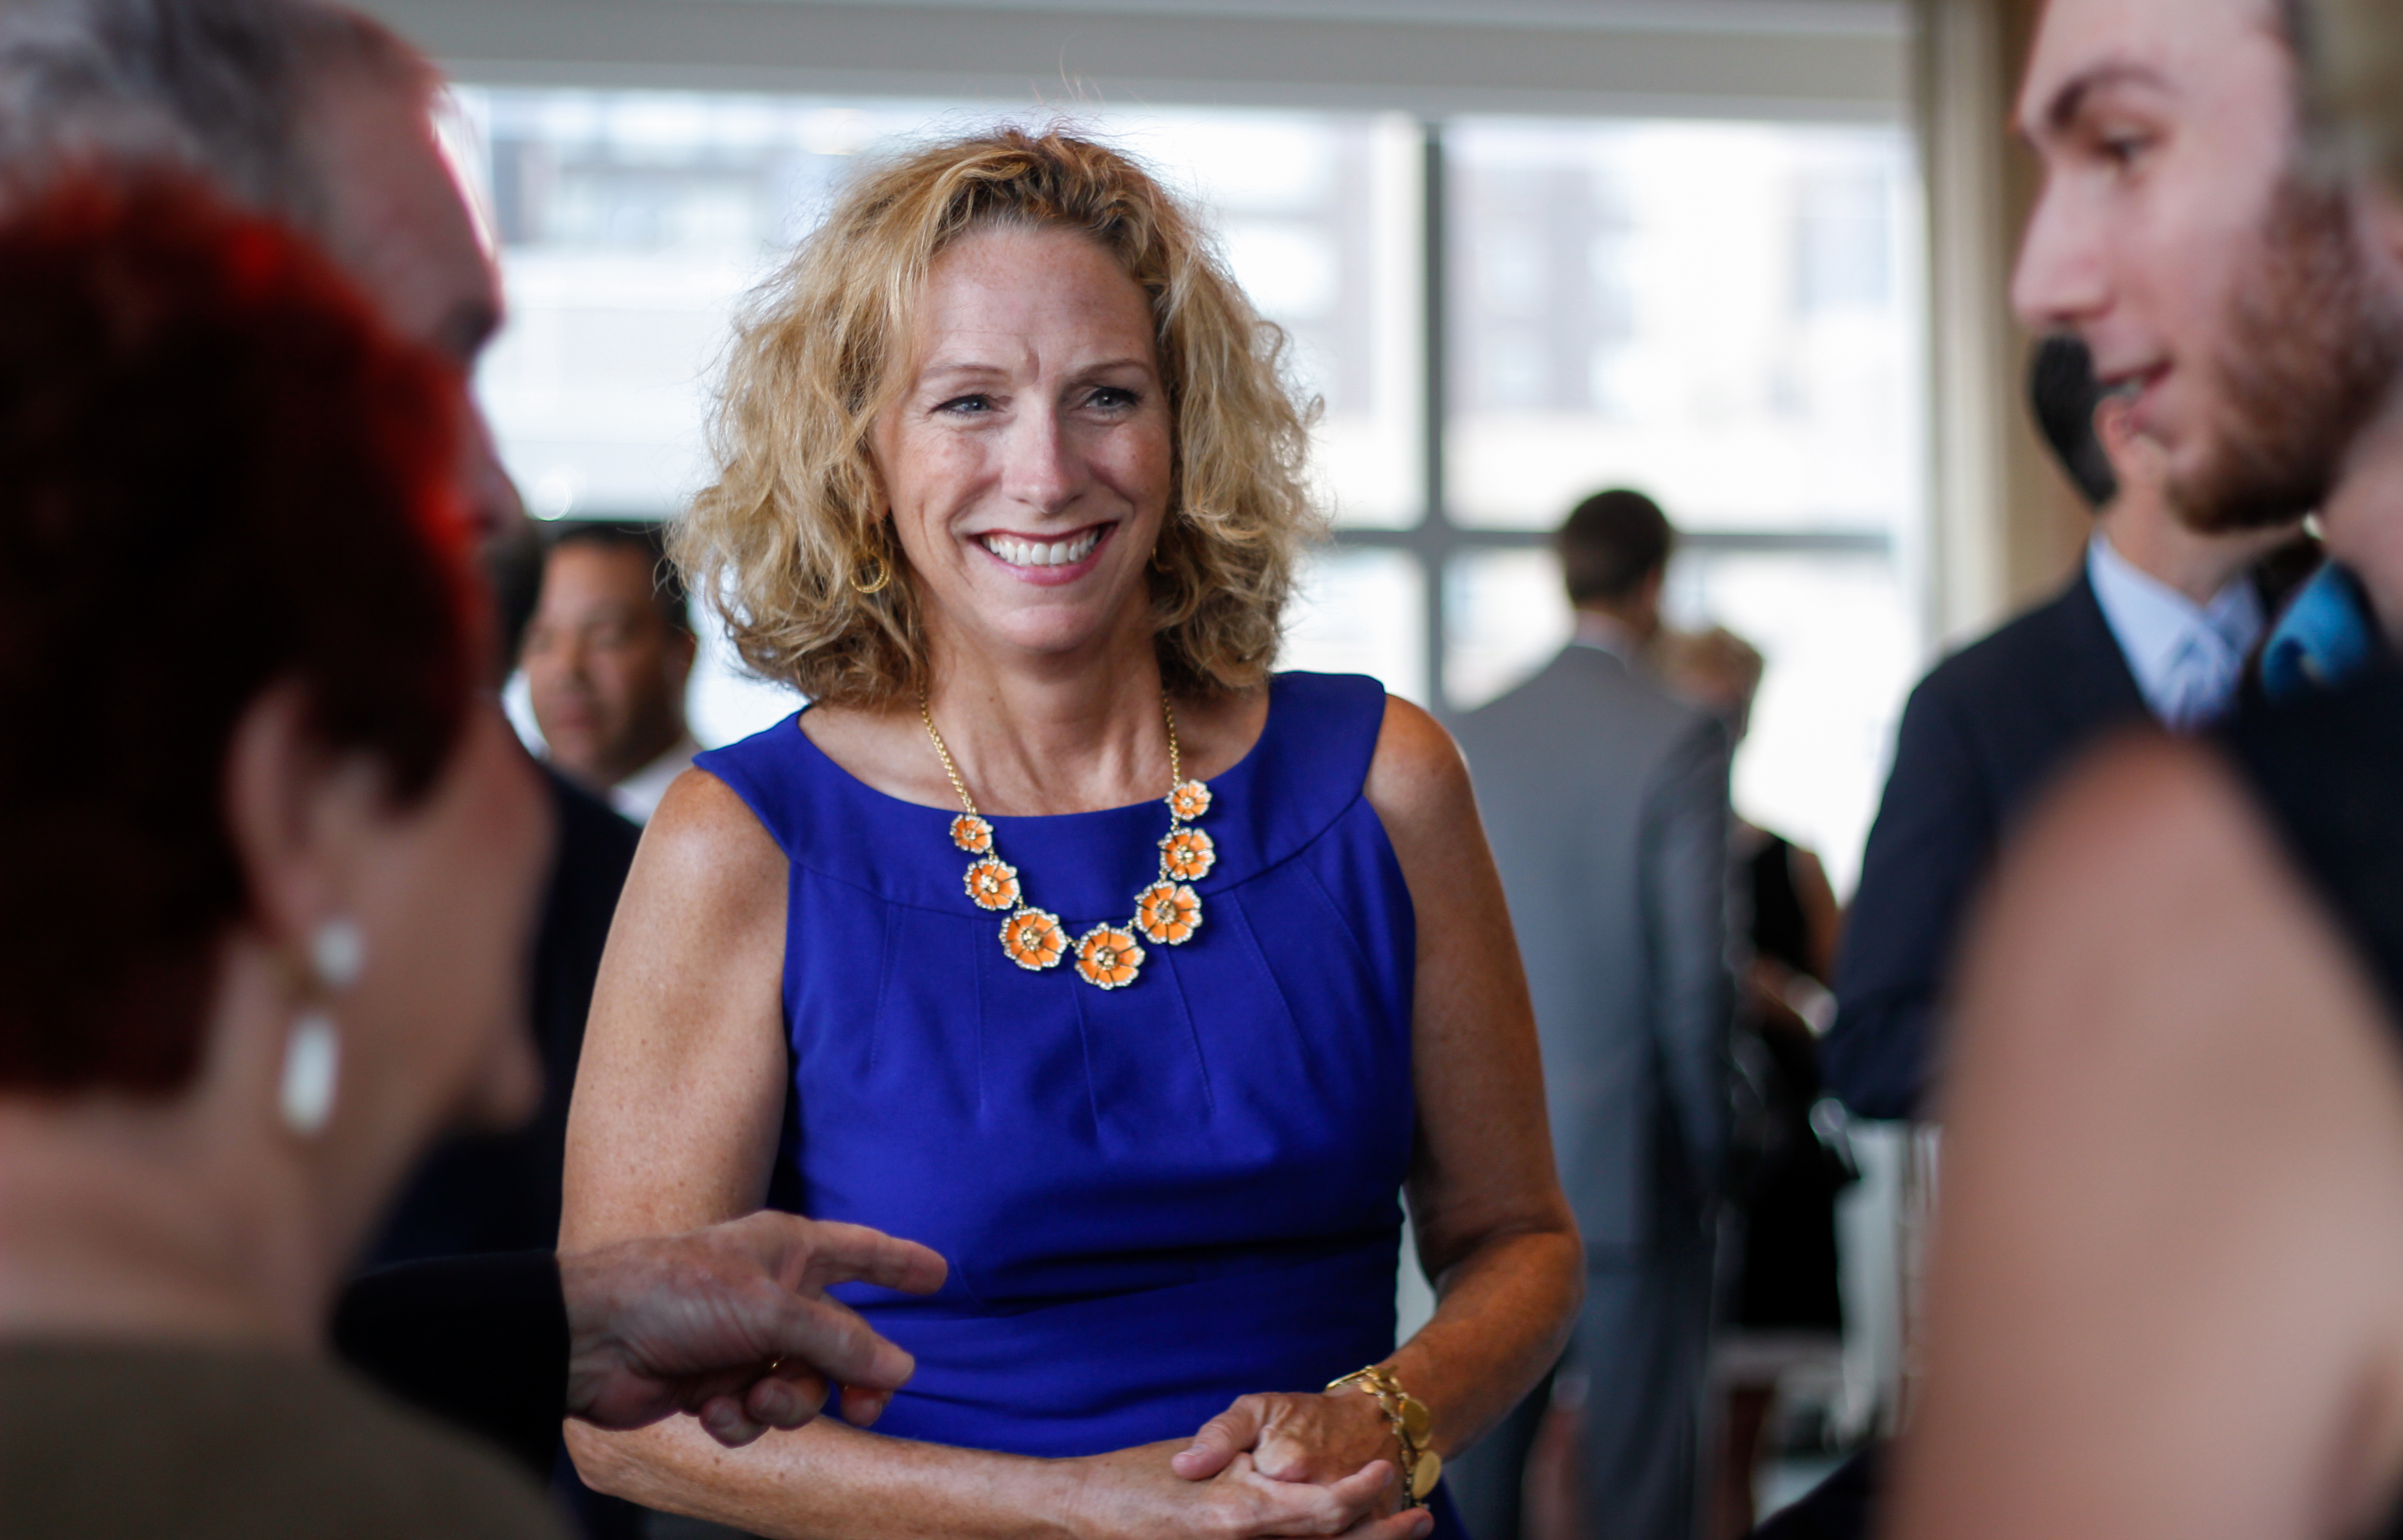 ESPN will kick off Monday Night Football with Beth Mowins, Brian